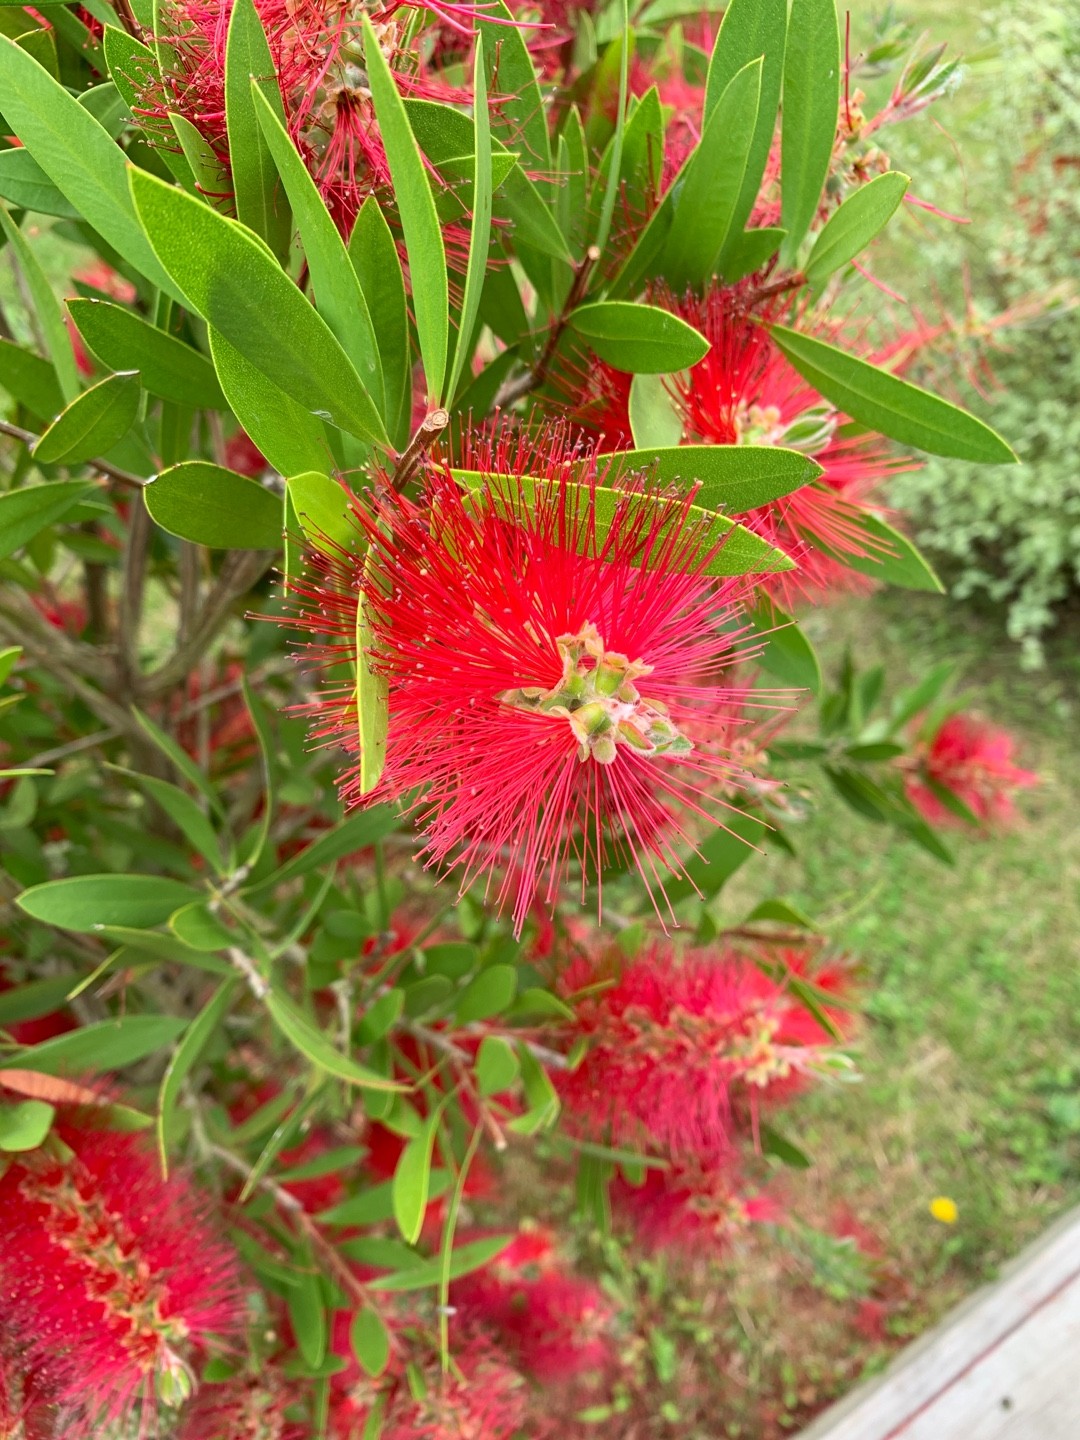 Learn How to Plant, Grow, and Maintain a Beautiful Bottle Brush Tree